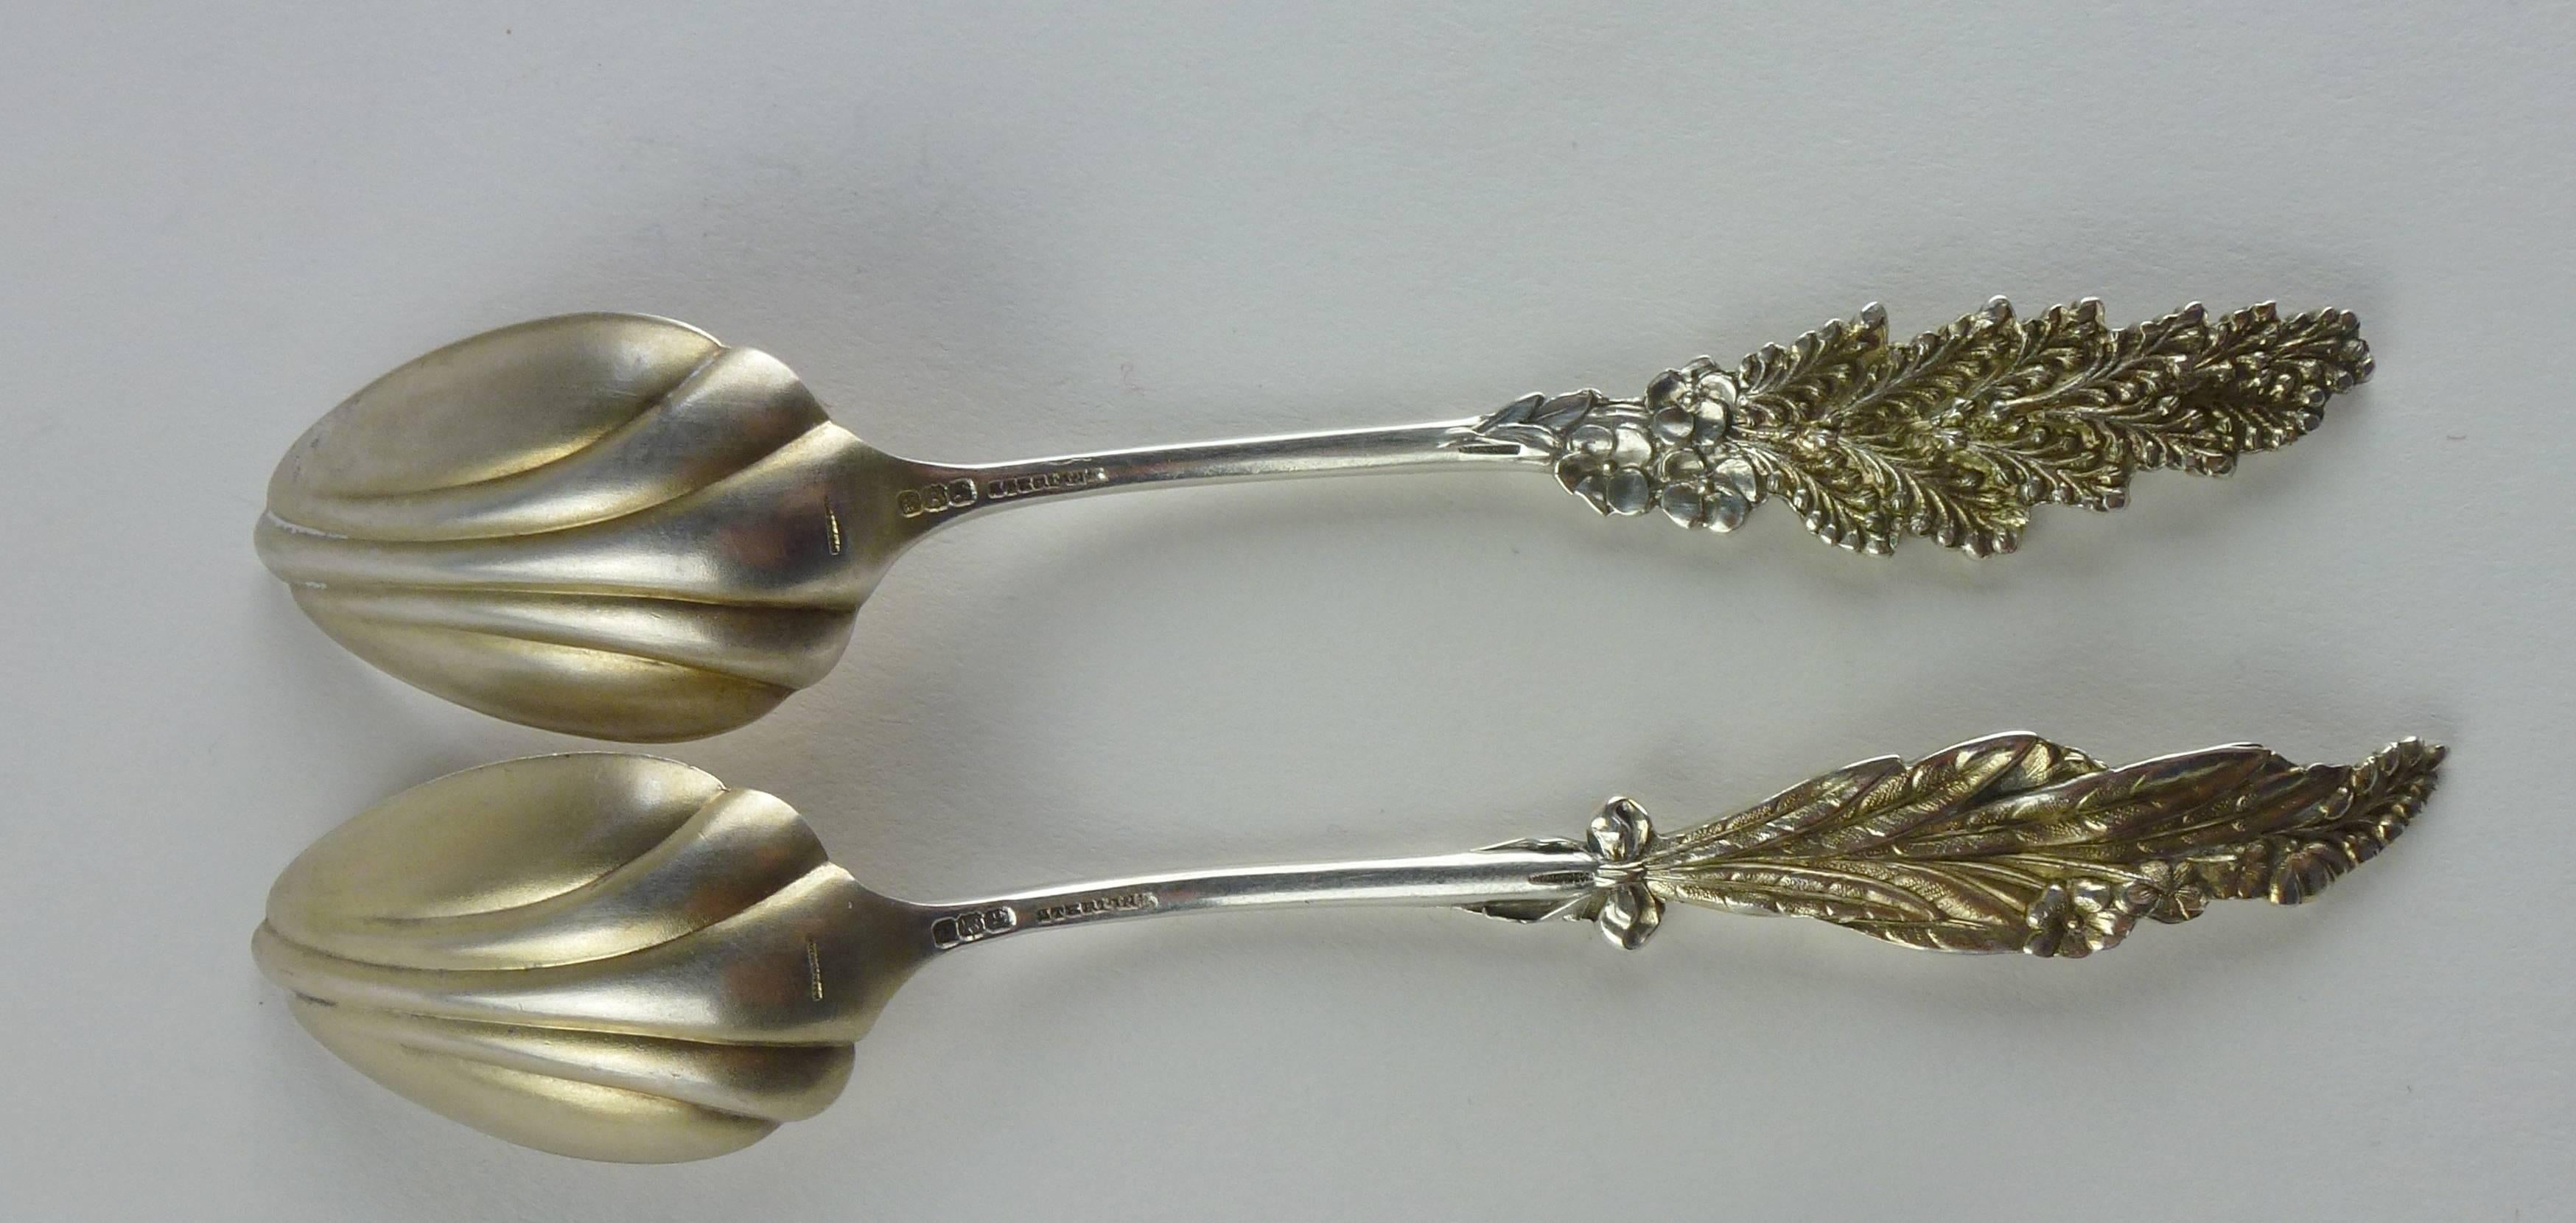 Molded Harlequin Set of Six Sterling and Gold-Wash Grapefruit Spoons by Whiting